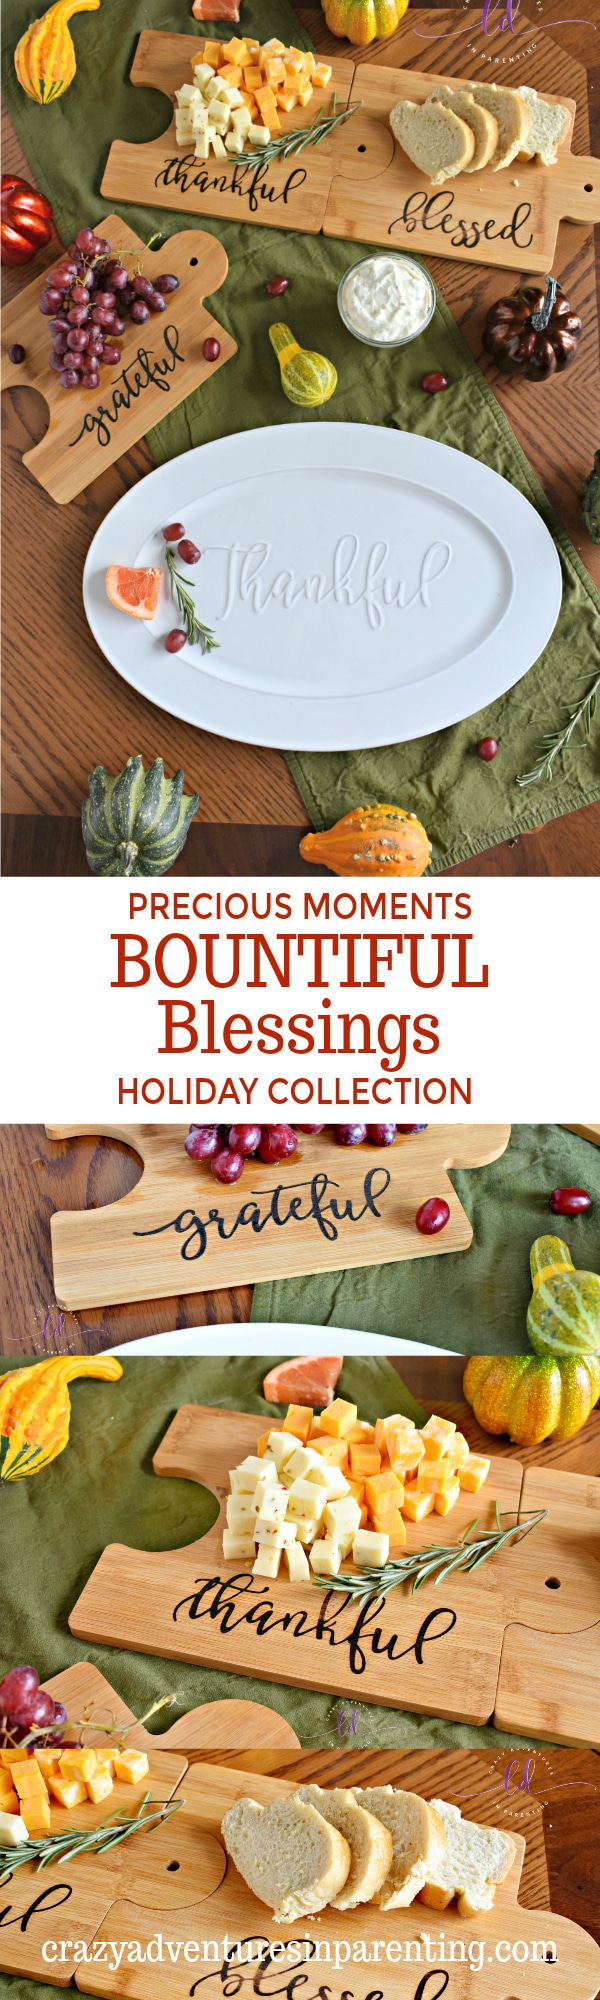 Precious Moments Bountiful Blessings Holiday Collection at Bed Bath and Beyond